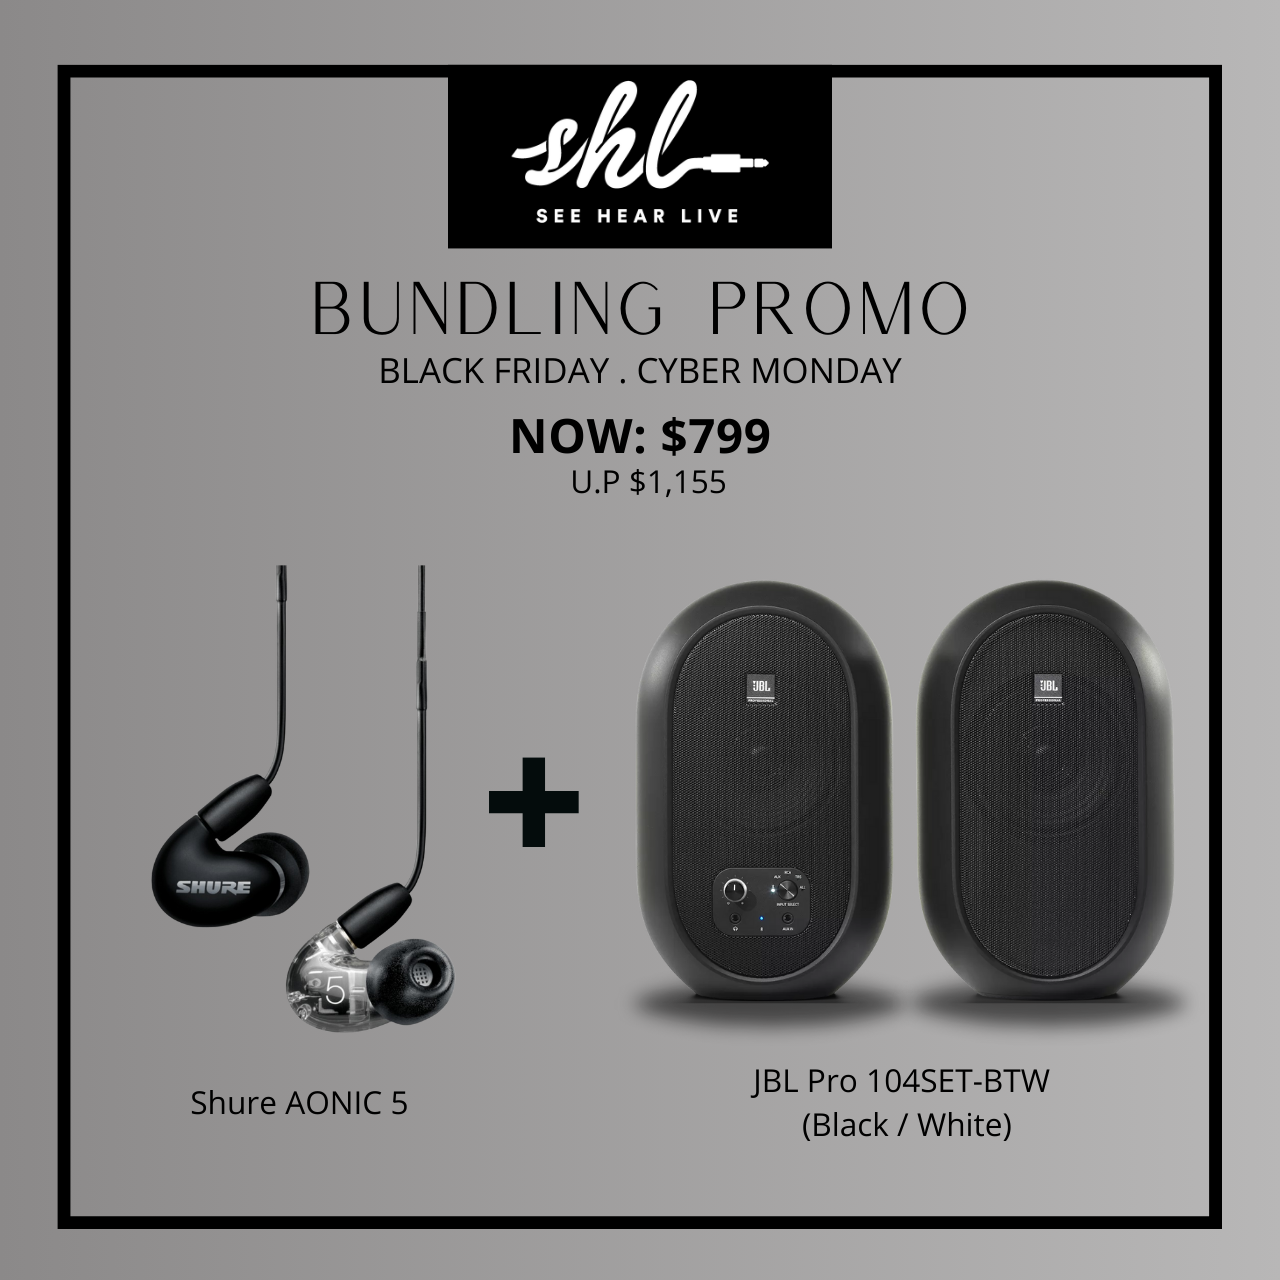 Shure AONIC 5 Sound Isolating™ Earphones and JBL Pro 104-BT (Pair) Bundle